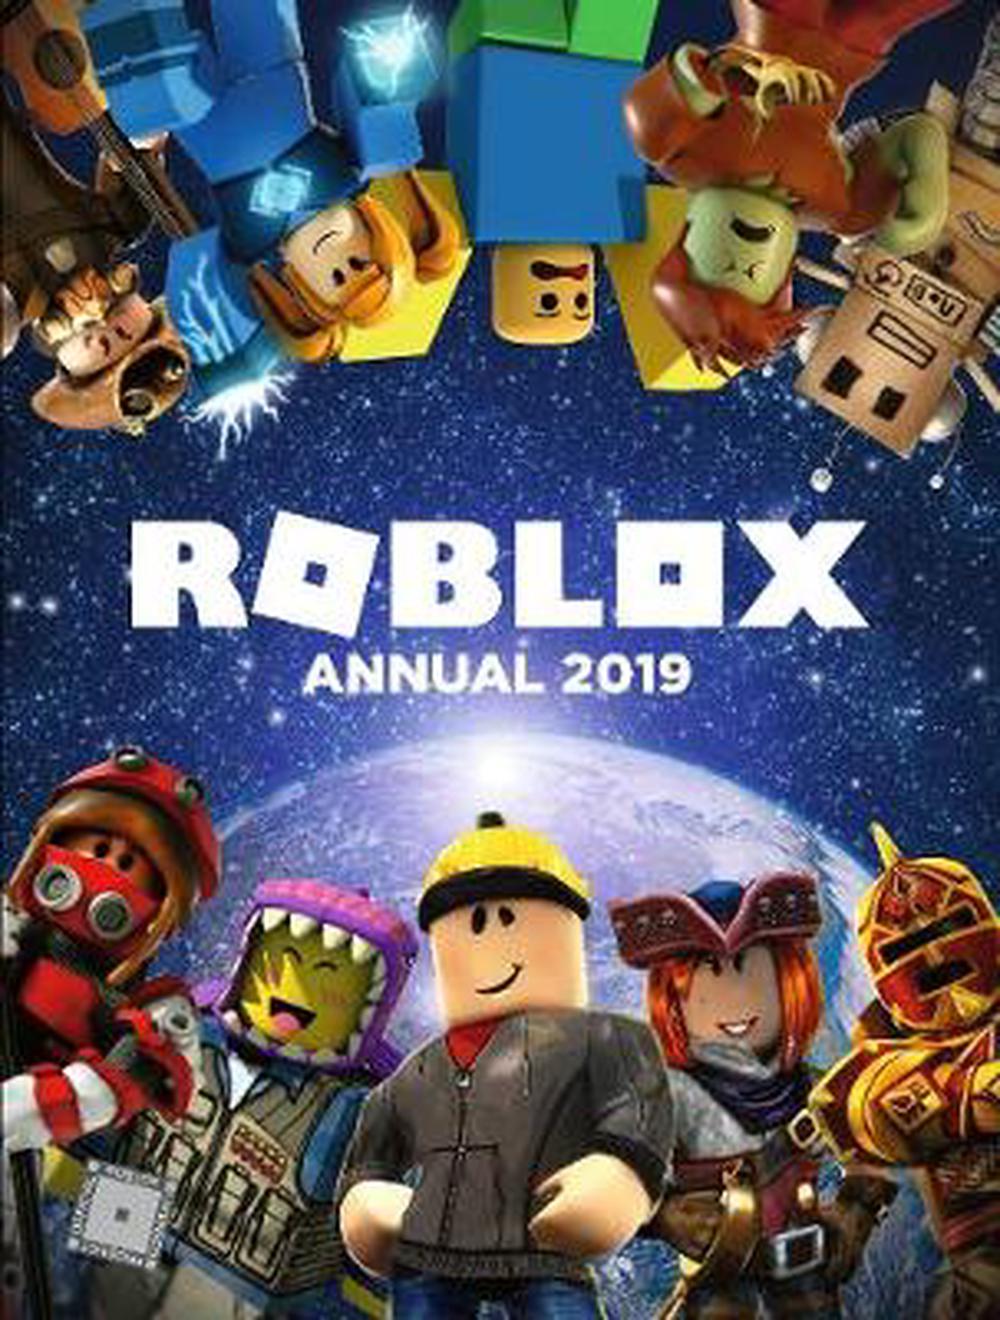 Roblox Annual 2019 By Egmont Publishing Uk Hardcover 9781405291156 Buy Online At The Nile - roblox movie 2019